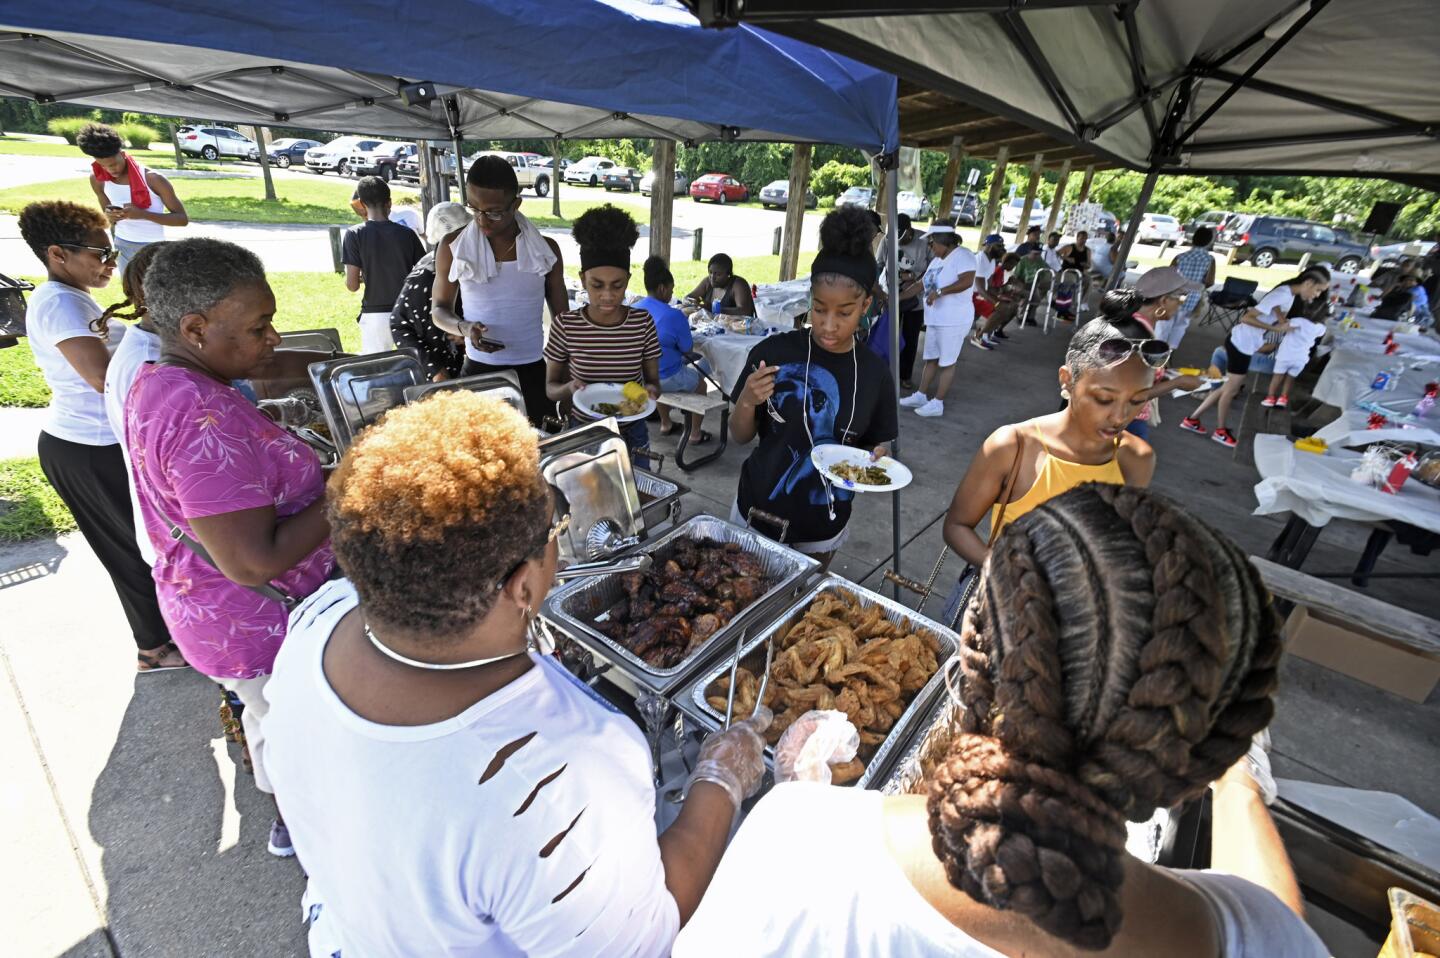 Friends and families of Daphne Alston gather for the 10th annual Tariq's Memorial Cookout at Turner Station Park to remember him. Tariq Alston, 22, was killed July 14, 2008 in Joppa and the case remains unsolved.